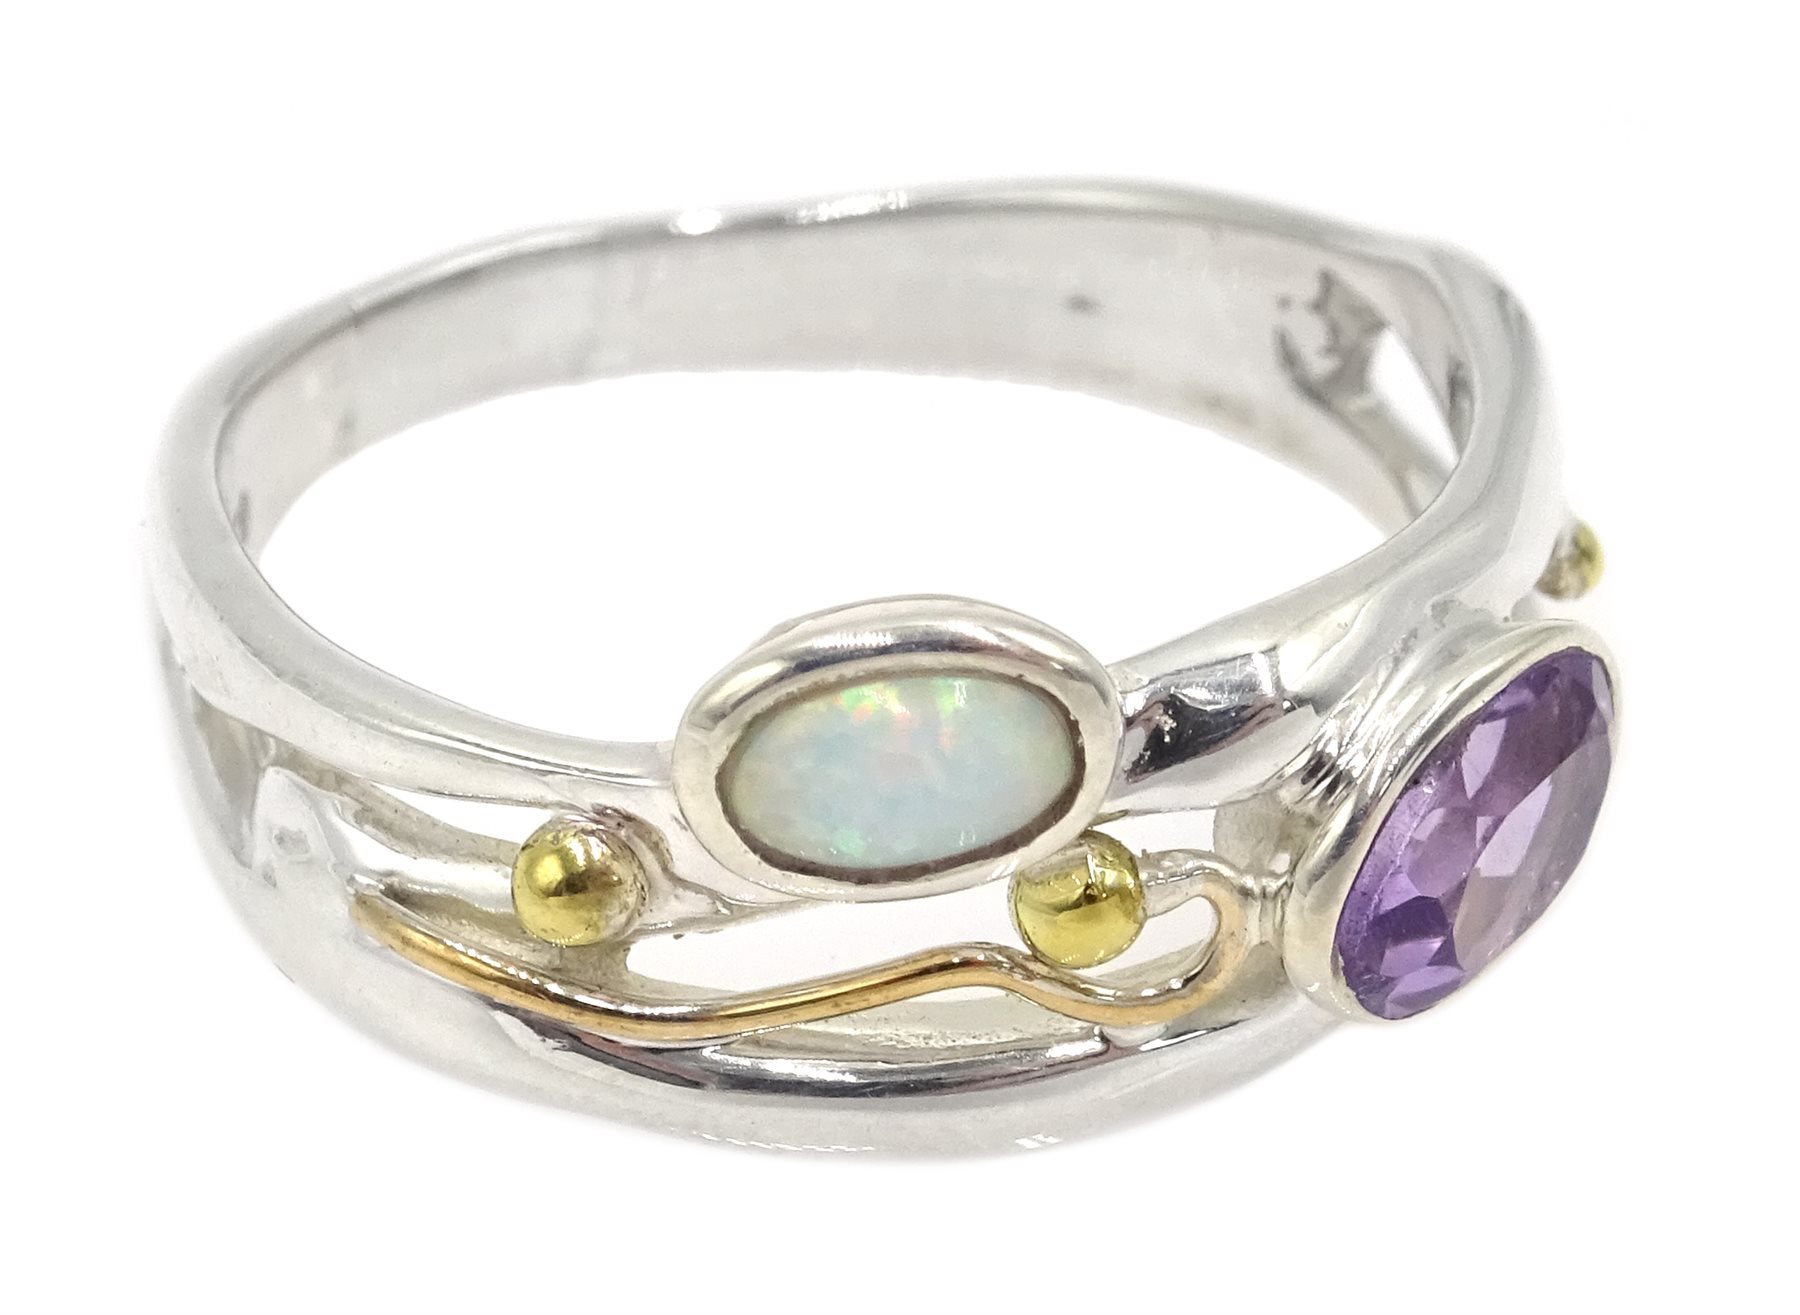 Silver and 14ct gold wire amethyst and opal ring - Image 2 of 7